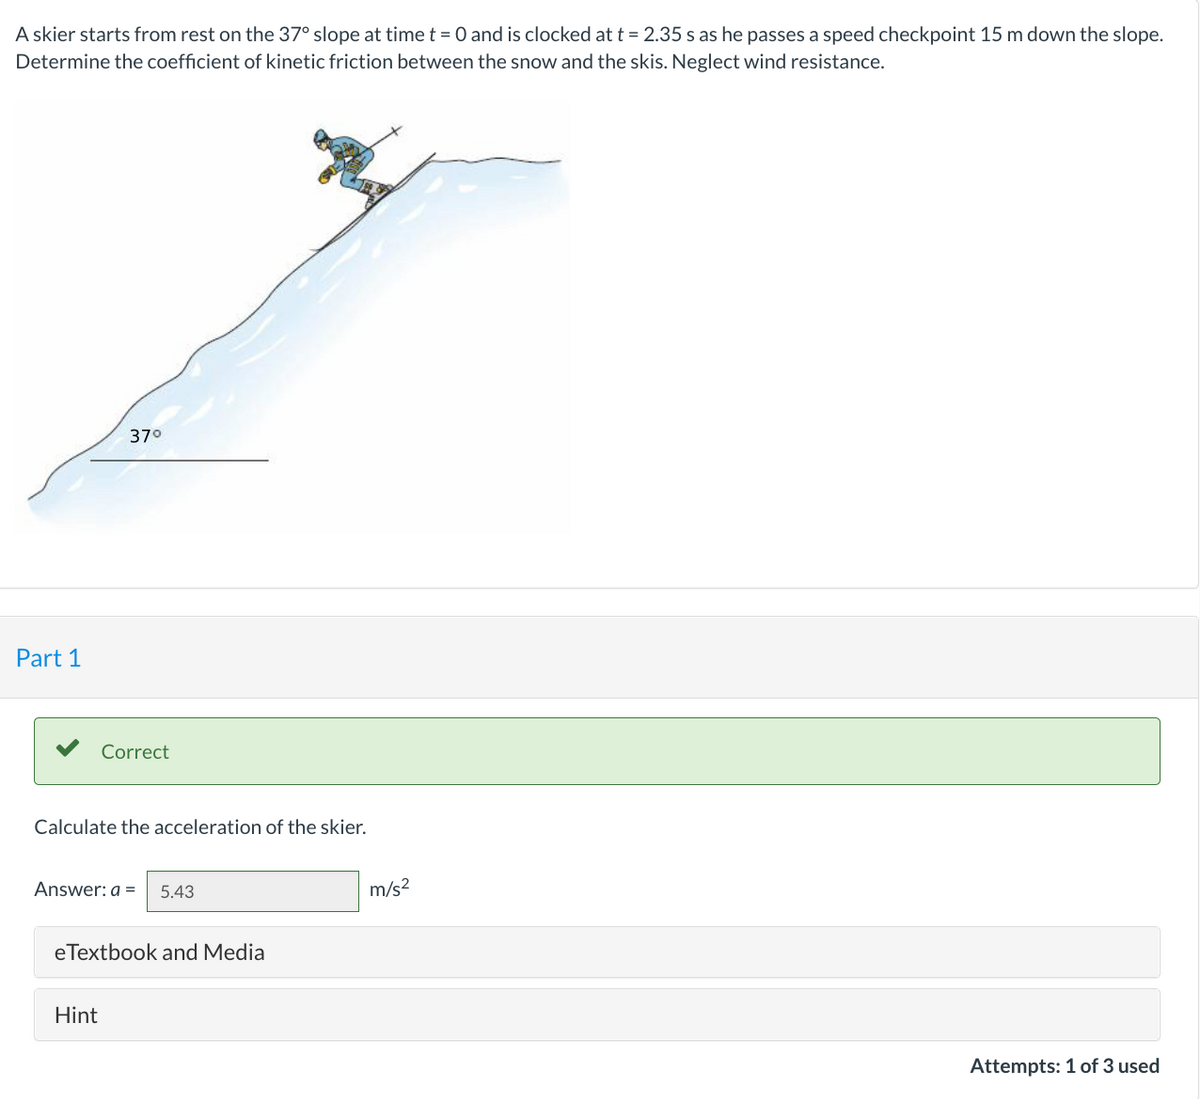 A skier starts from rest on the 37° slope at time t = 0 and is clocked at t = 2.35 s as he passes a speed checkpoint 15 m down the slope.
Determine the coefficient of kinetic friction between the snow and the skis. Neglect wind resistance.
Part 1
37°
Correct
Calculate the acceleration of the skier.
Answer: a = 5.43
Hint
eTextbook and Media
m/s²
Attempts: 1 of 3 used